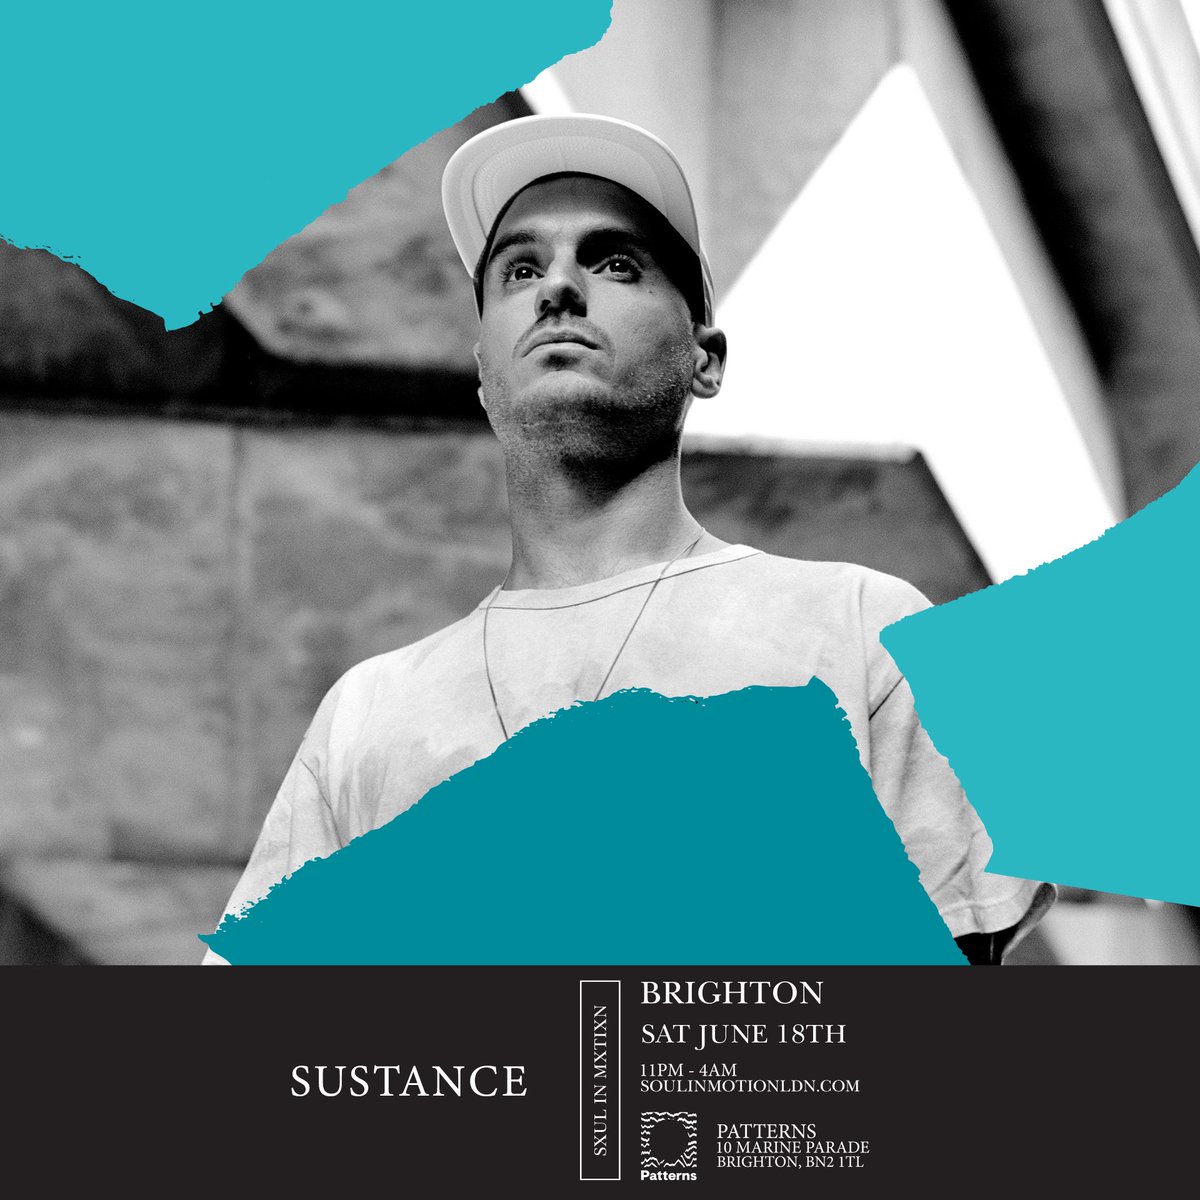 This weekend @sustancemusic will be joining us at Soul In Motion Brighton / Sat June 18th at @PatternsBTN 11pm-4am. Alongside Lineup : @BaileyIntabeats @MarkSystemUK @NEEDFORMIRRORS @kuspdnb Tickets link.dice.fm/K319585d6166